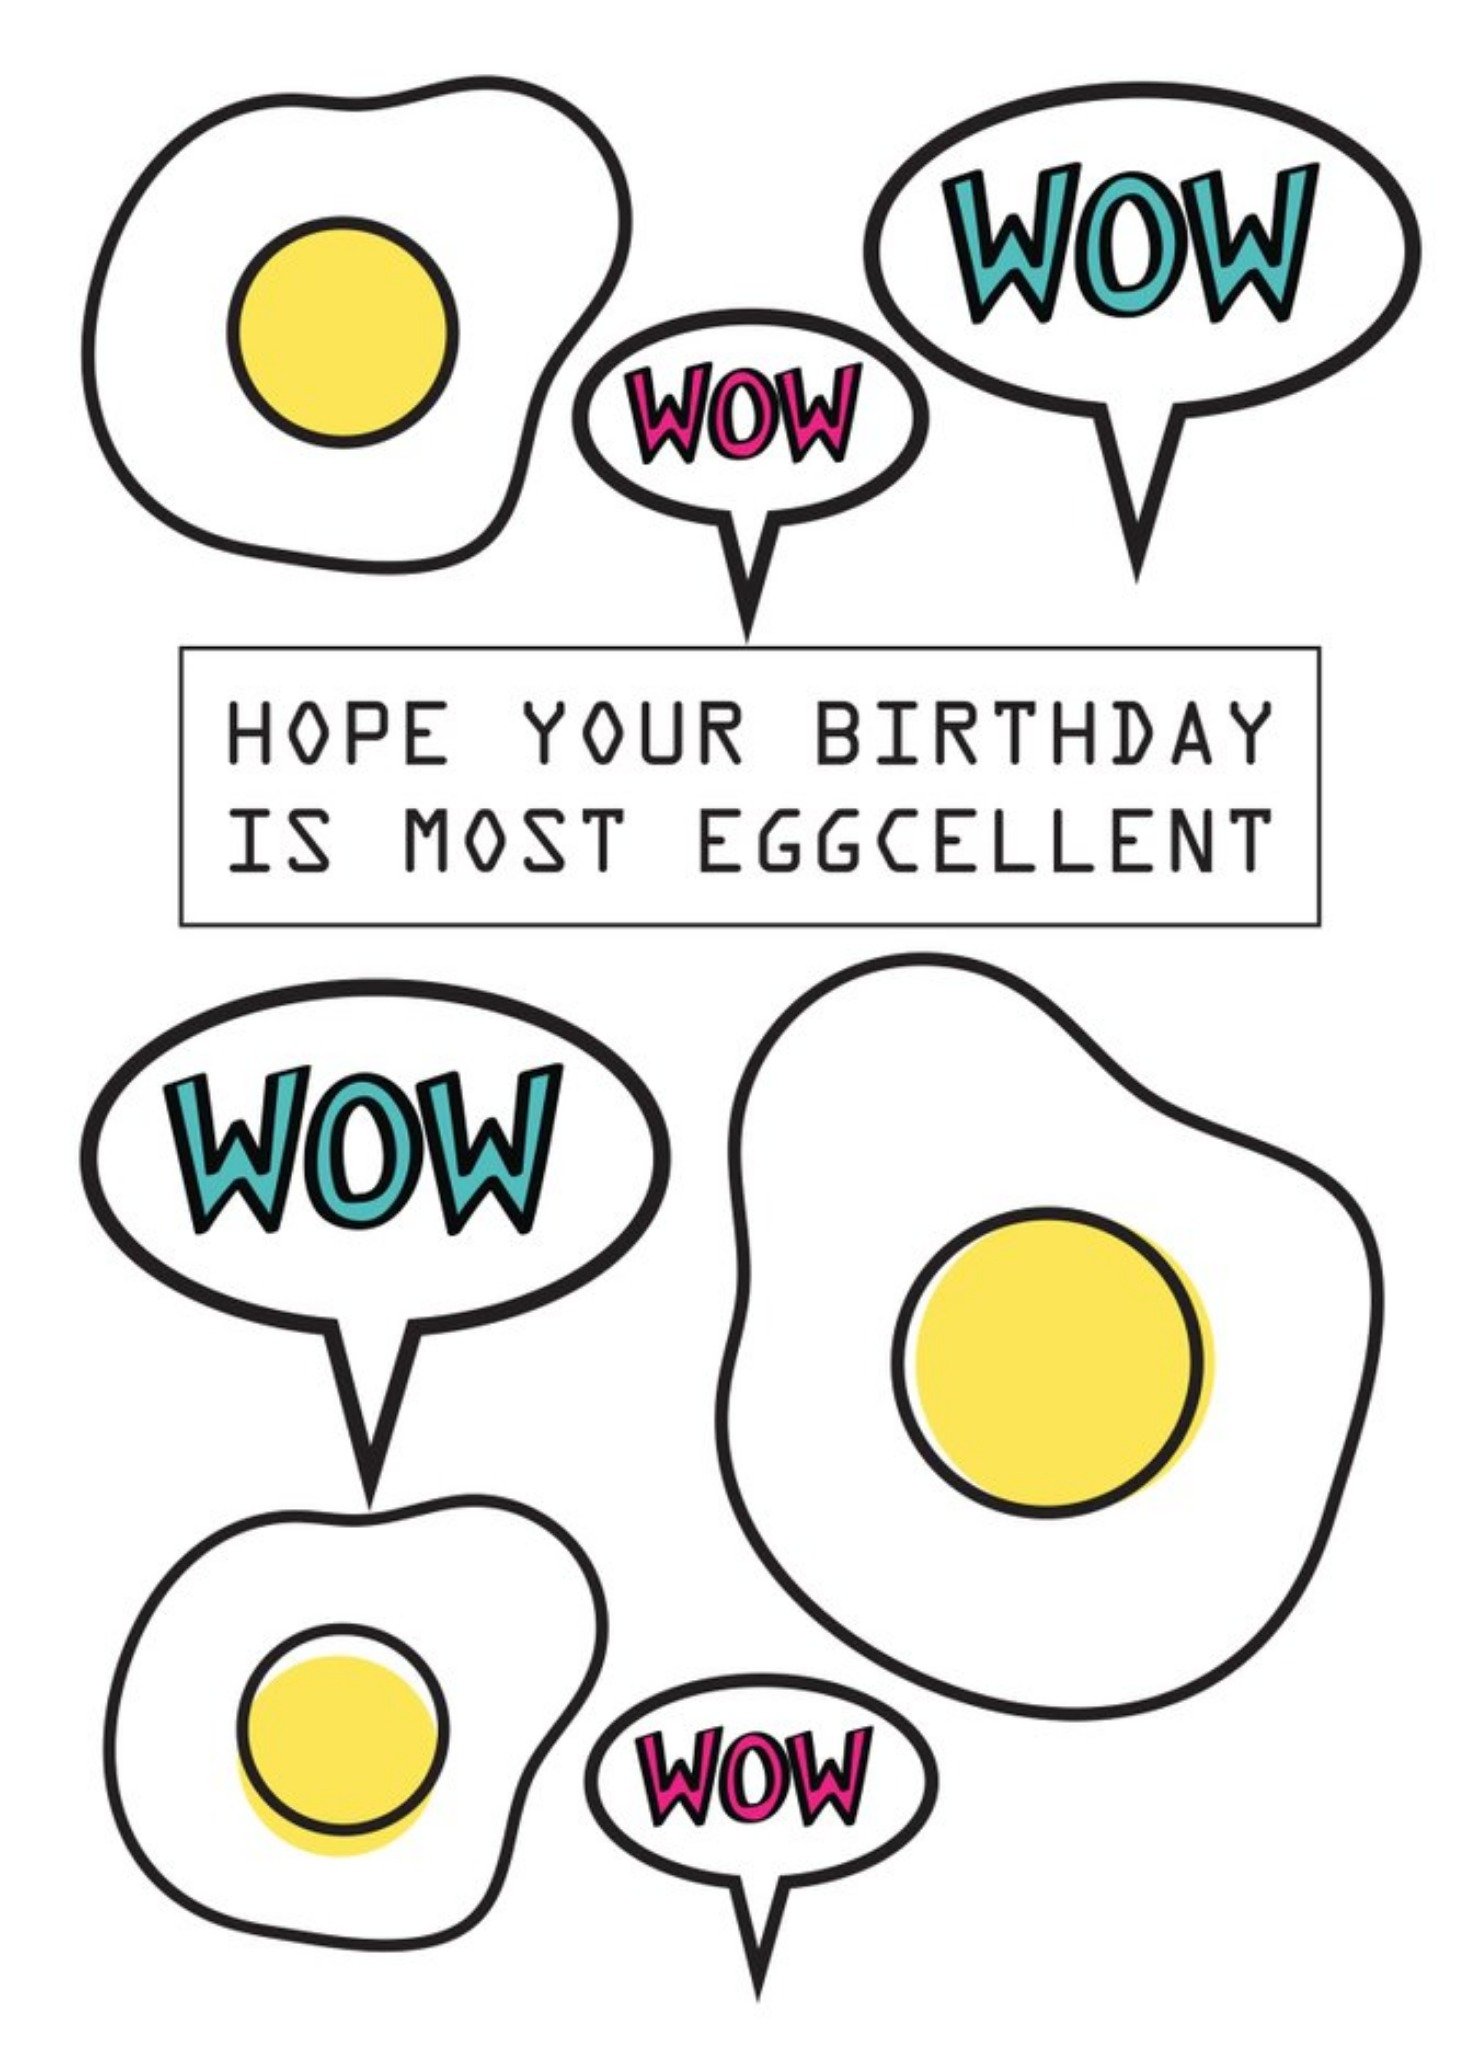 Moonpig Hope Your Birthday Is Most Eggcellent Card, Large